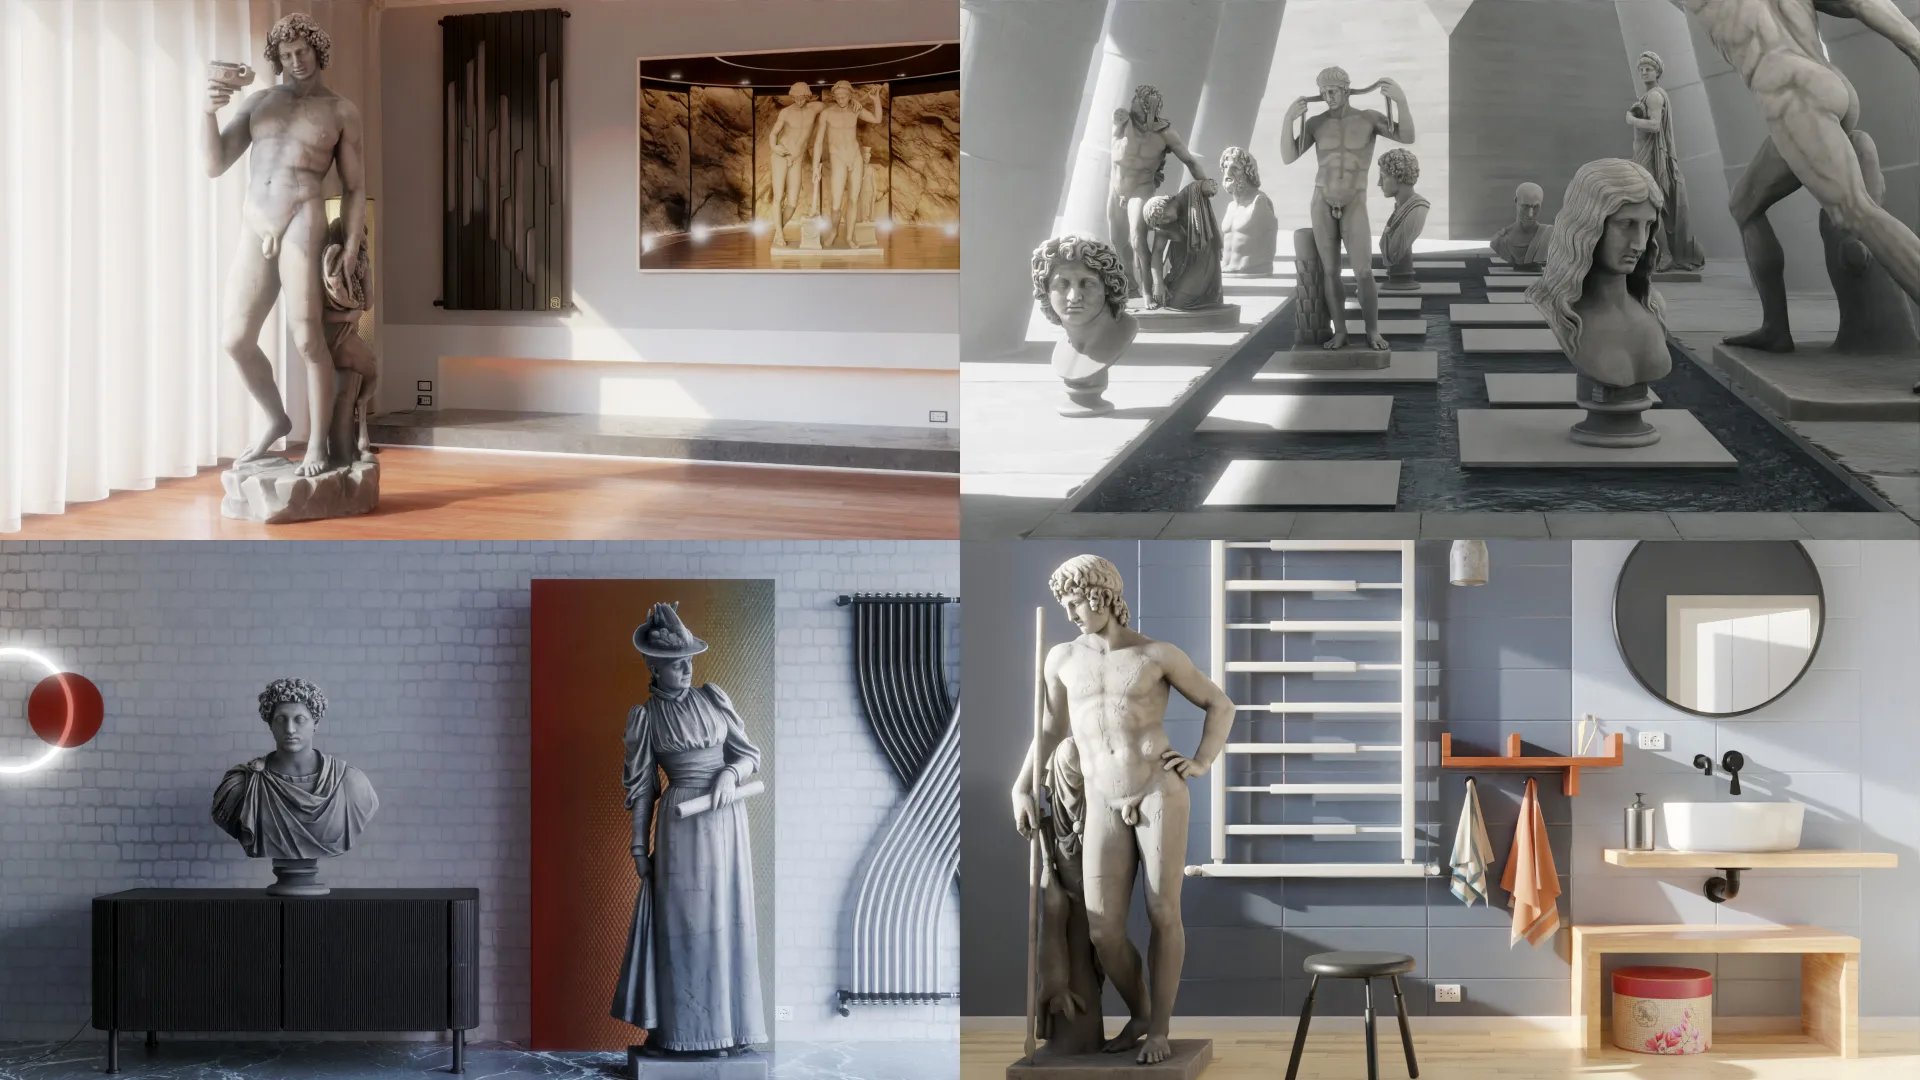 160+ Scaned Famous Statues in Rome 3d models Pack Ⅱ